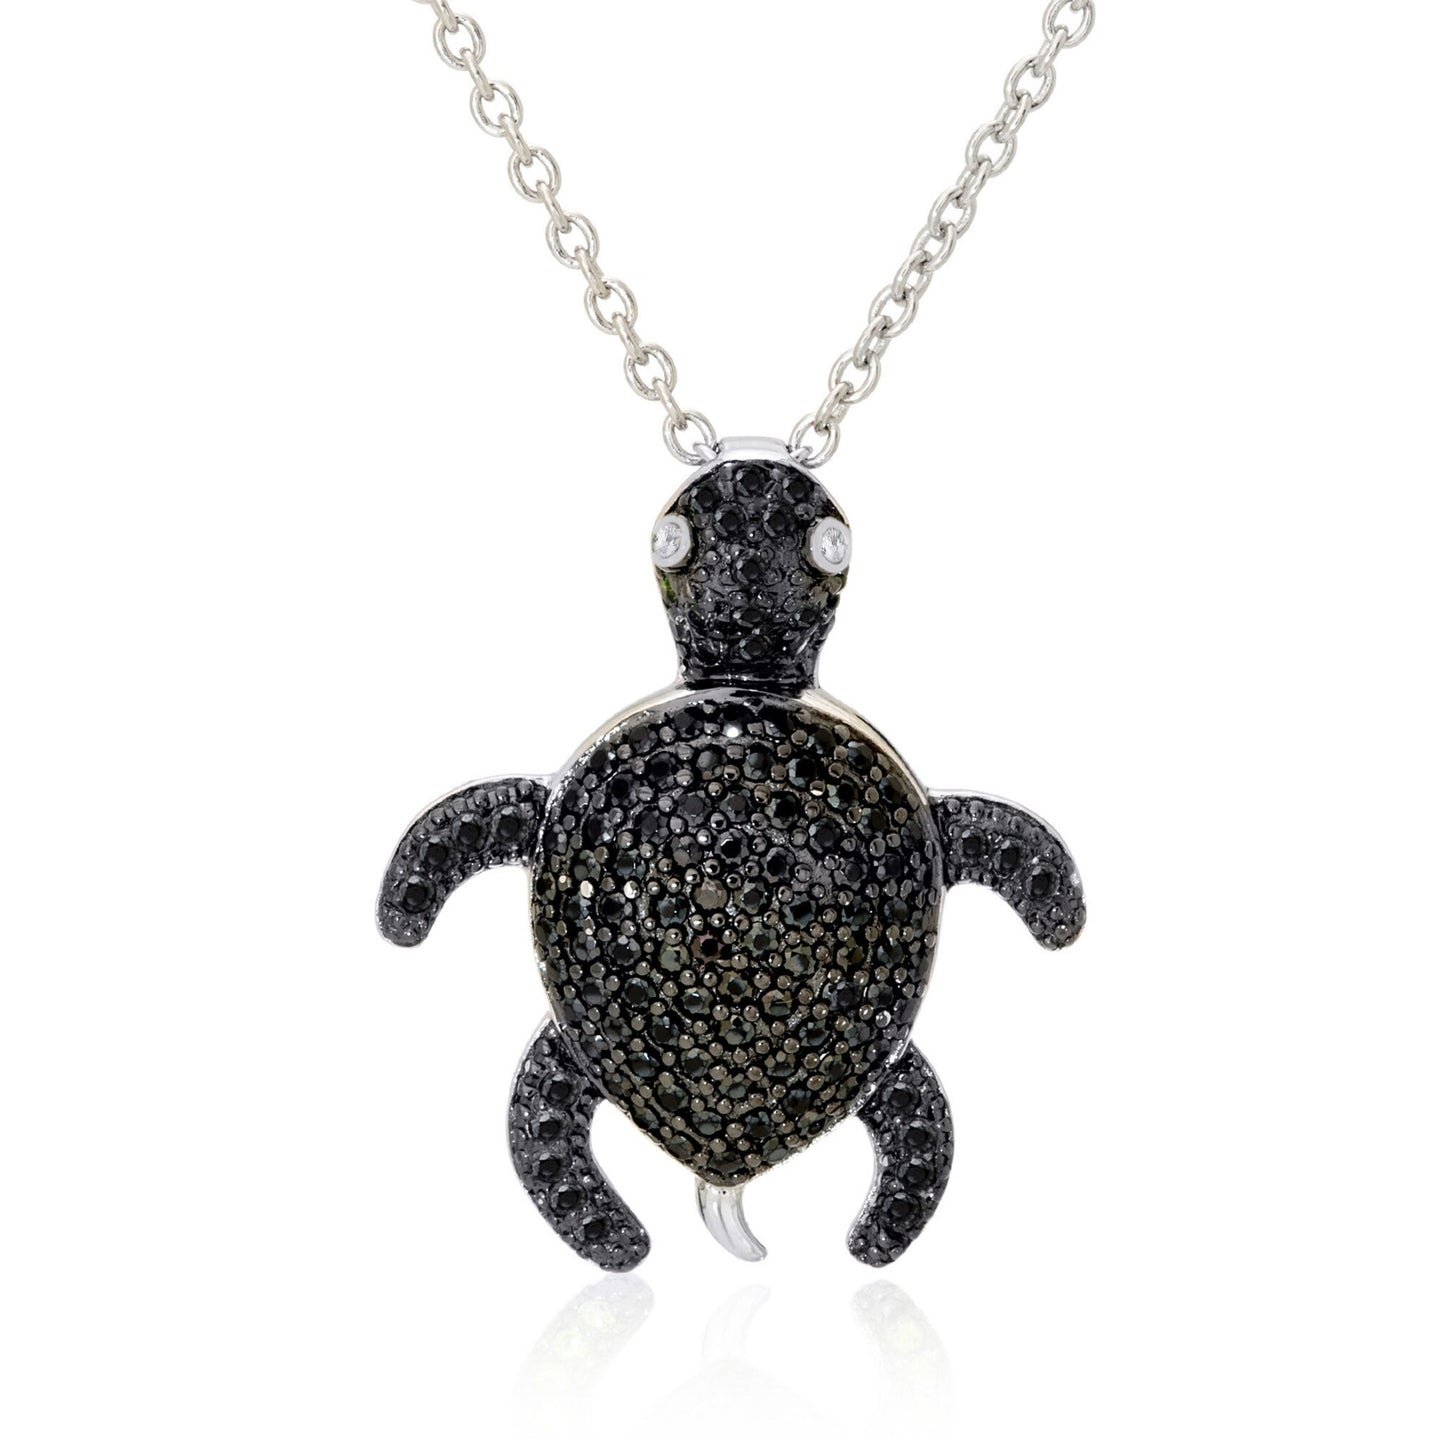 Natural Black Spinel With White Zircon Gemstone Pendant, 925 Sterling Silver Turtle Tortoise Pendant, Birthday Gift, Gift For Her